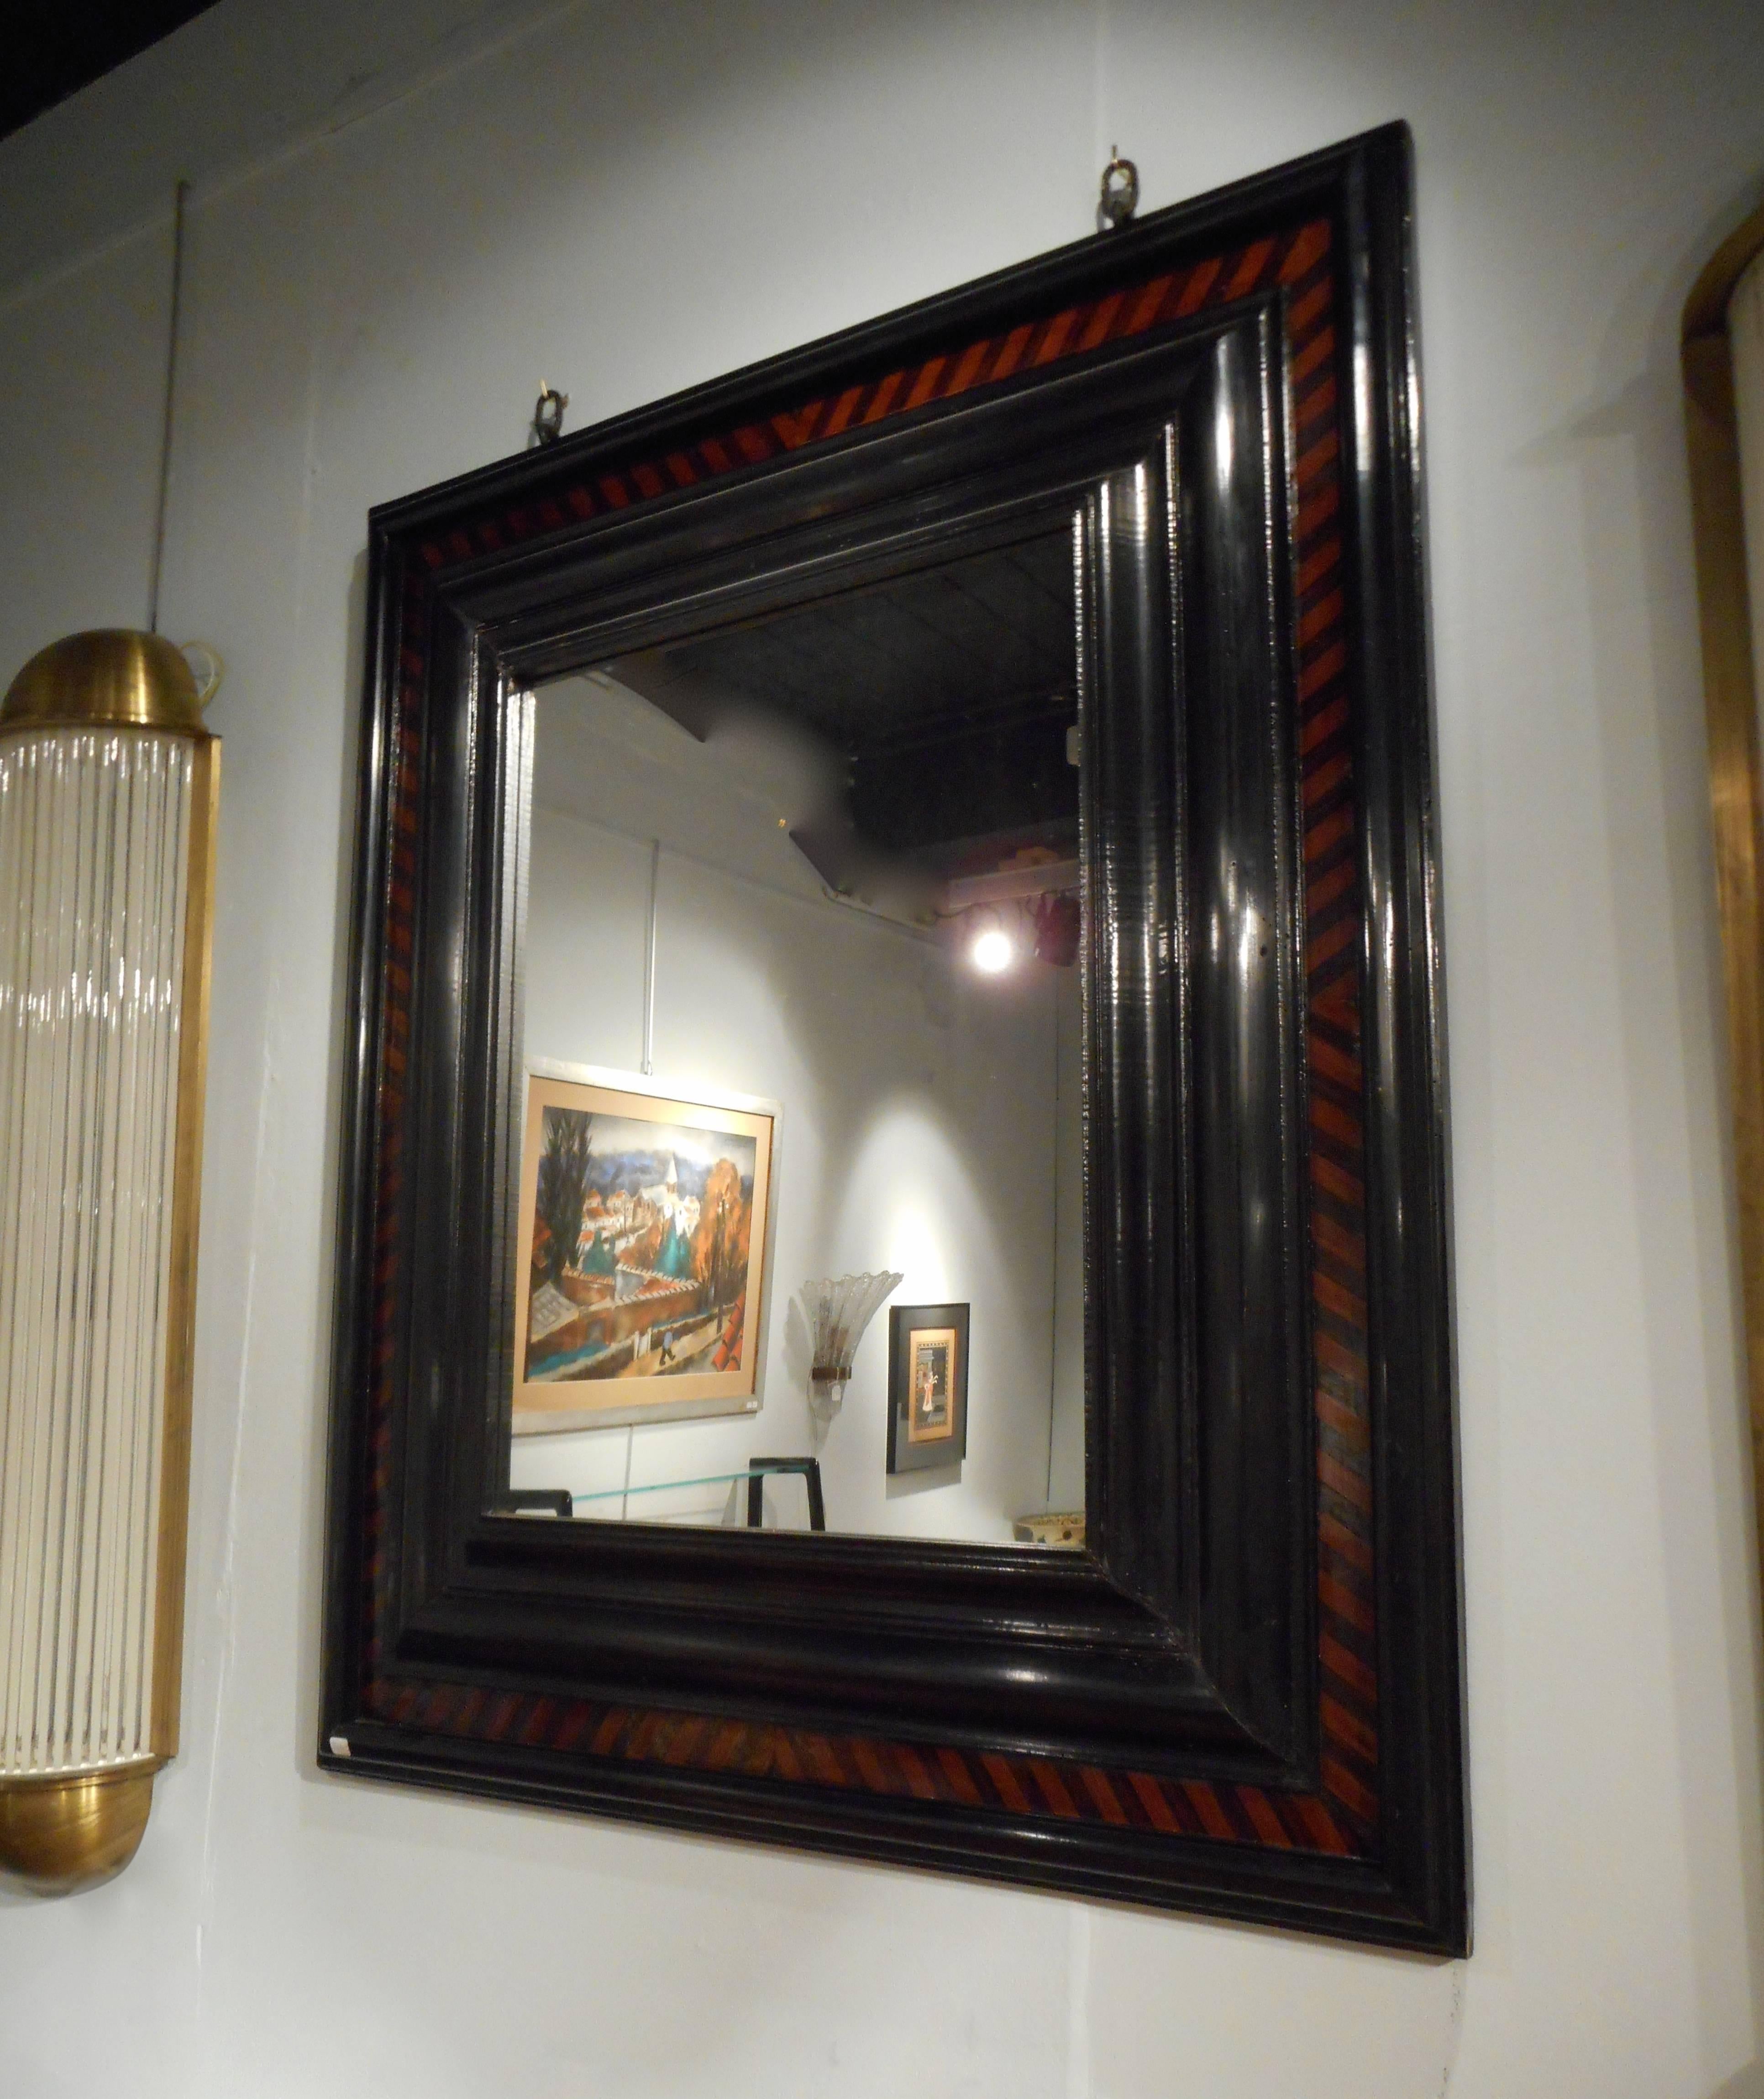 Black lacquered and parqueted veneer wood.
Second half of the 19th century.
Probably German.